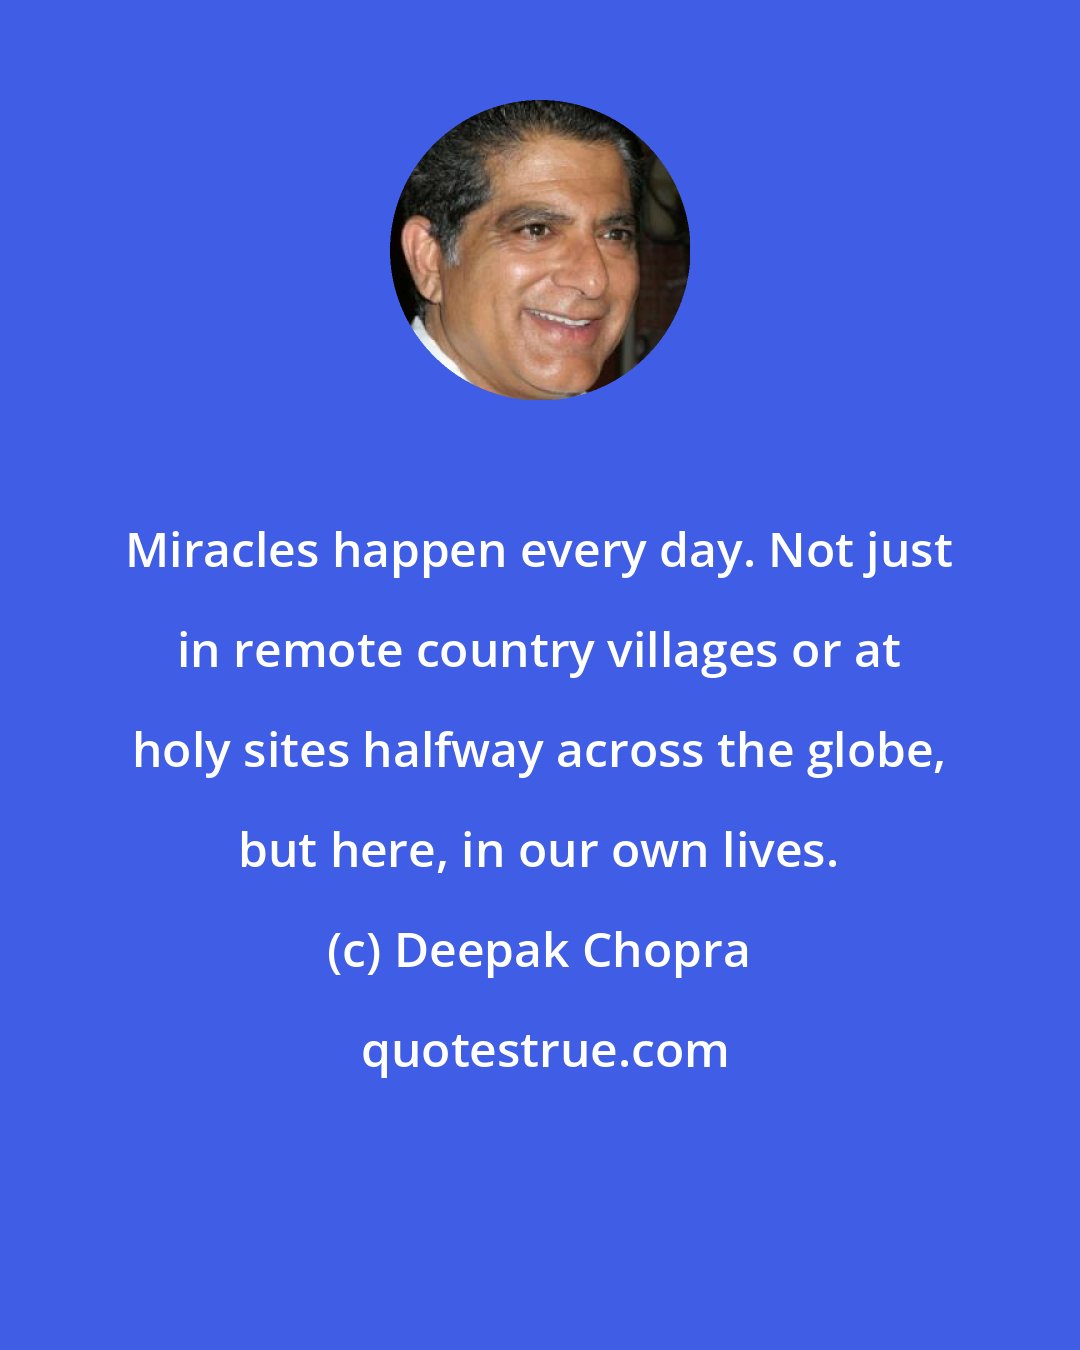 Deepak Chopra: Miracles happen every day. Not just in remote country villages or at holy sites halfway across the globe, but here, in our own lives.